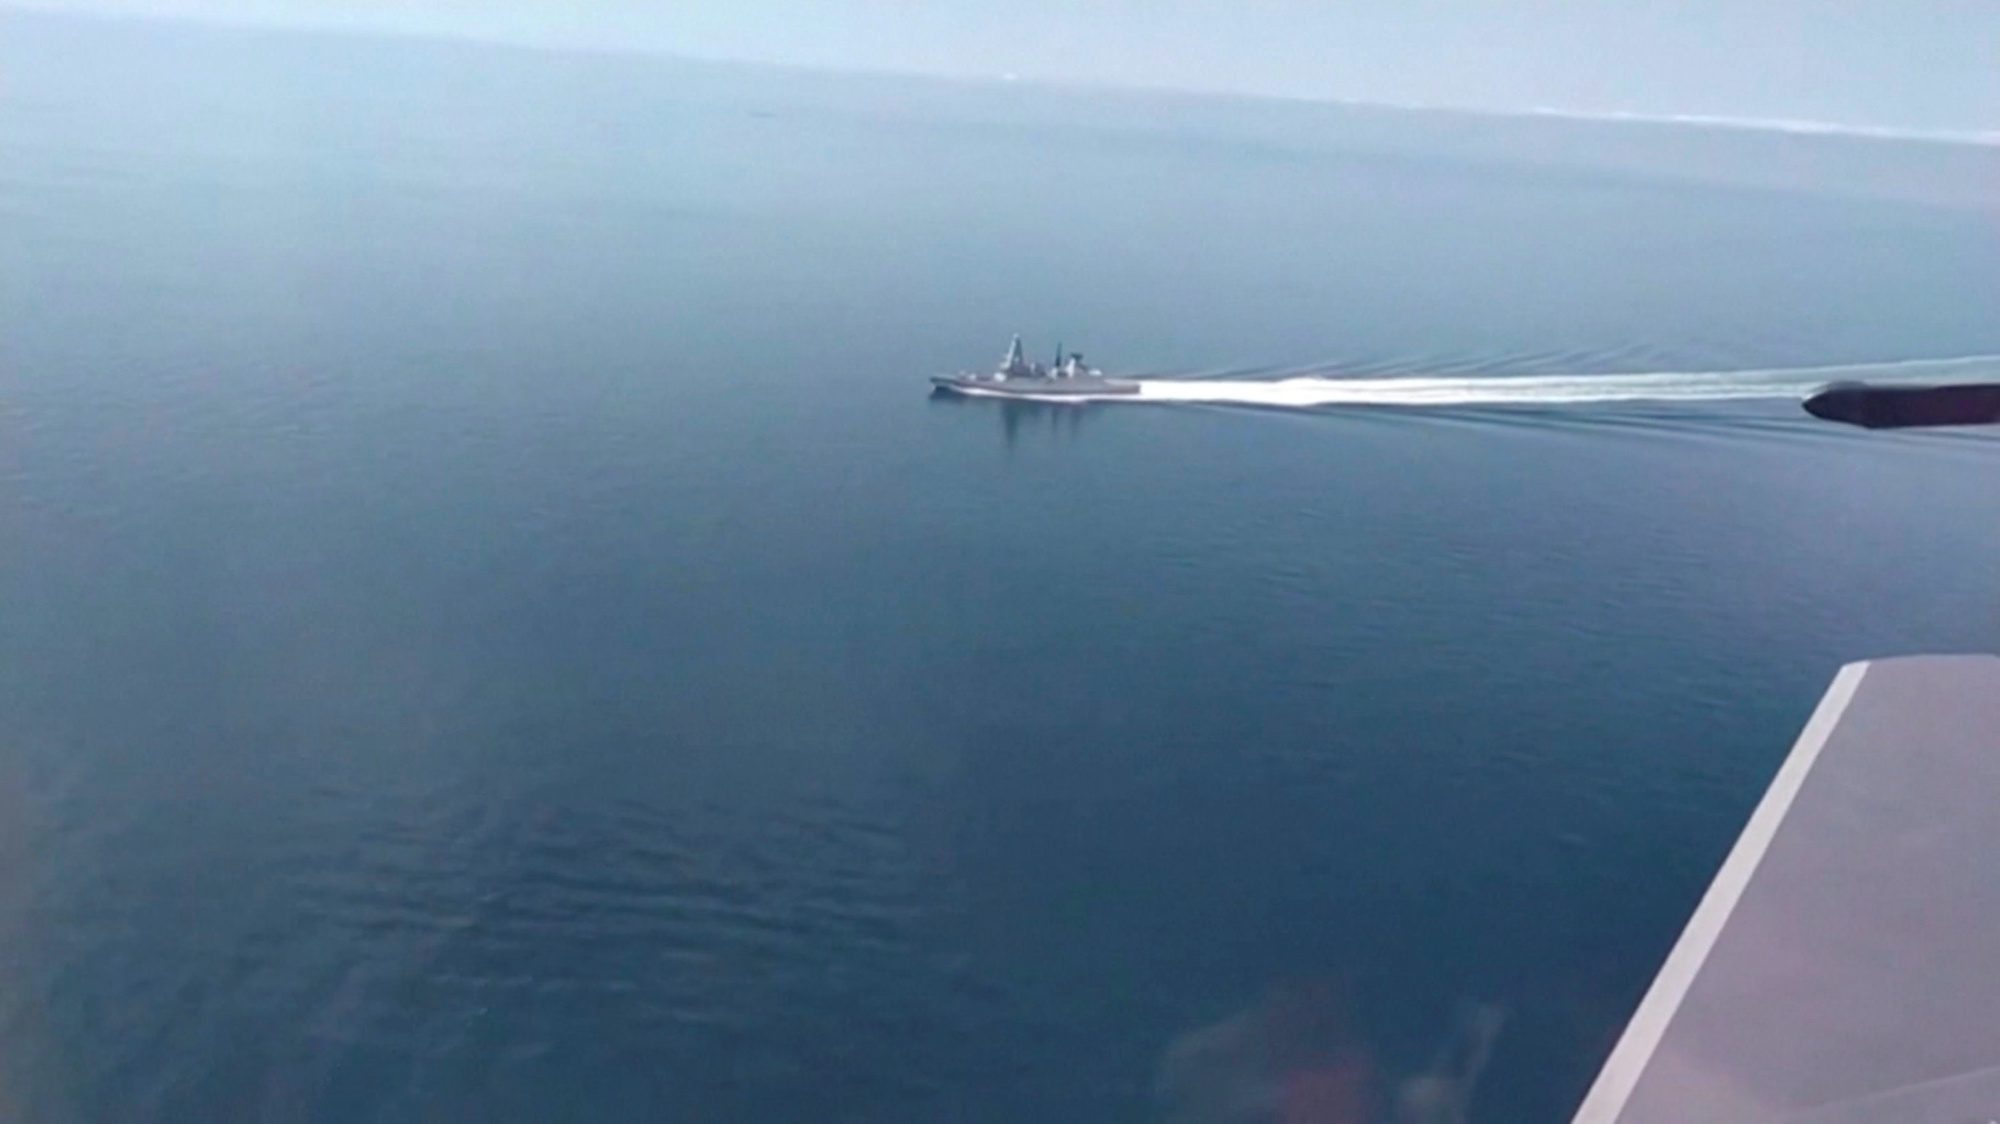 Russia Says It Fired Warning Shots at British Destroyer Off Crimea